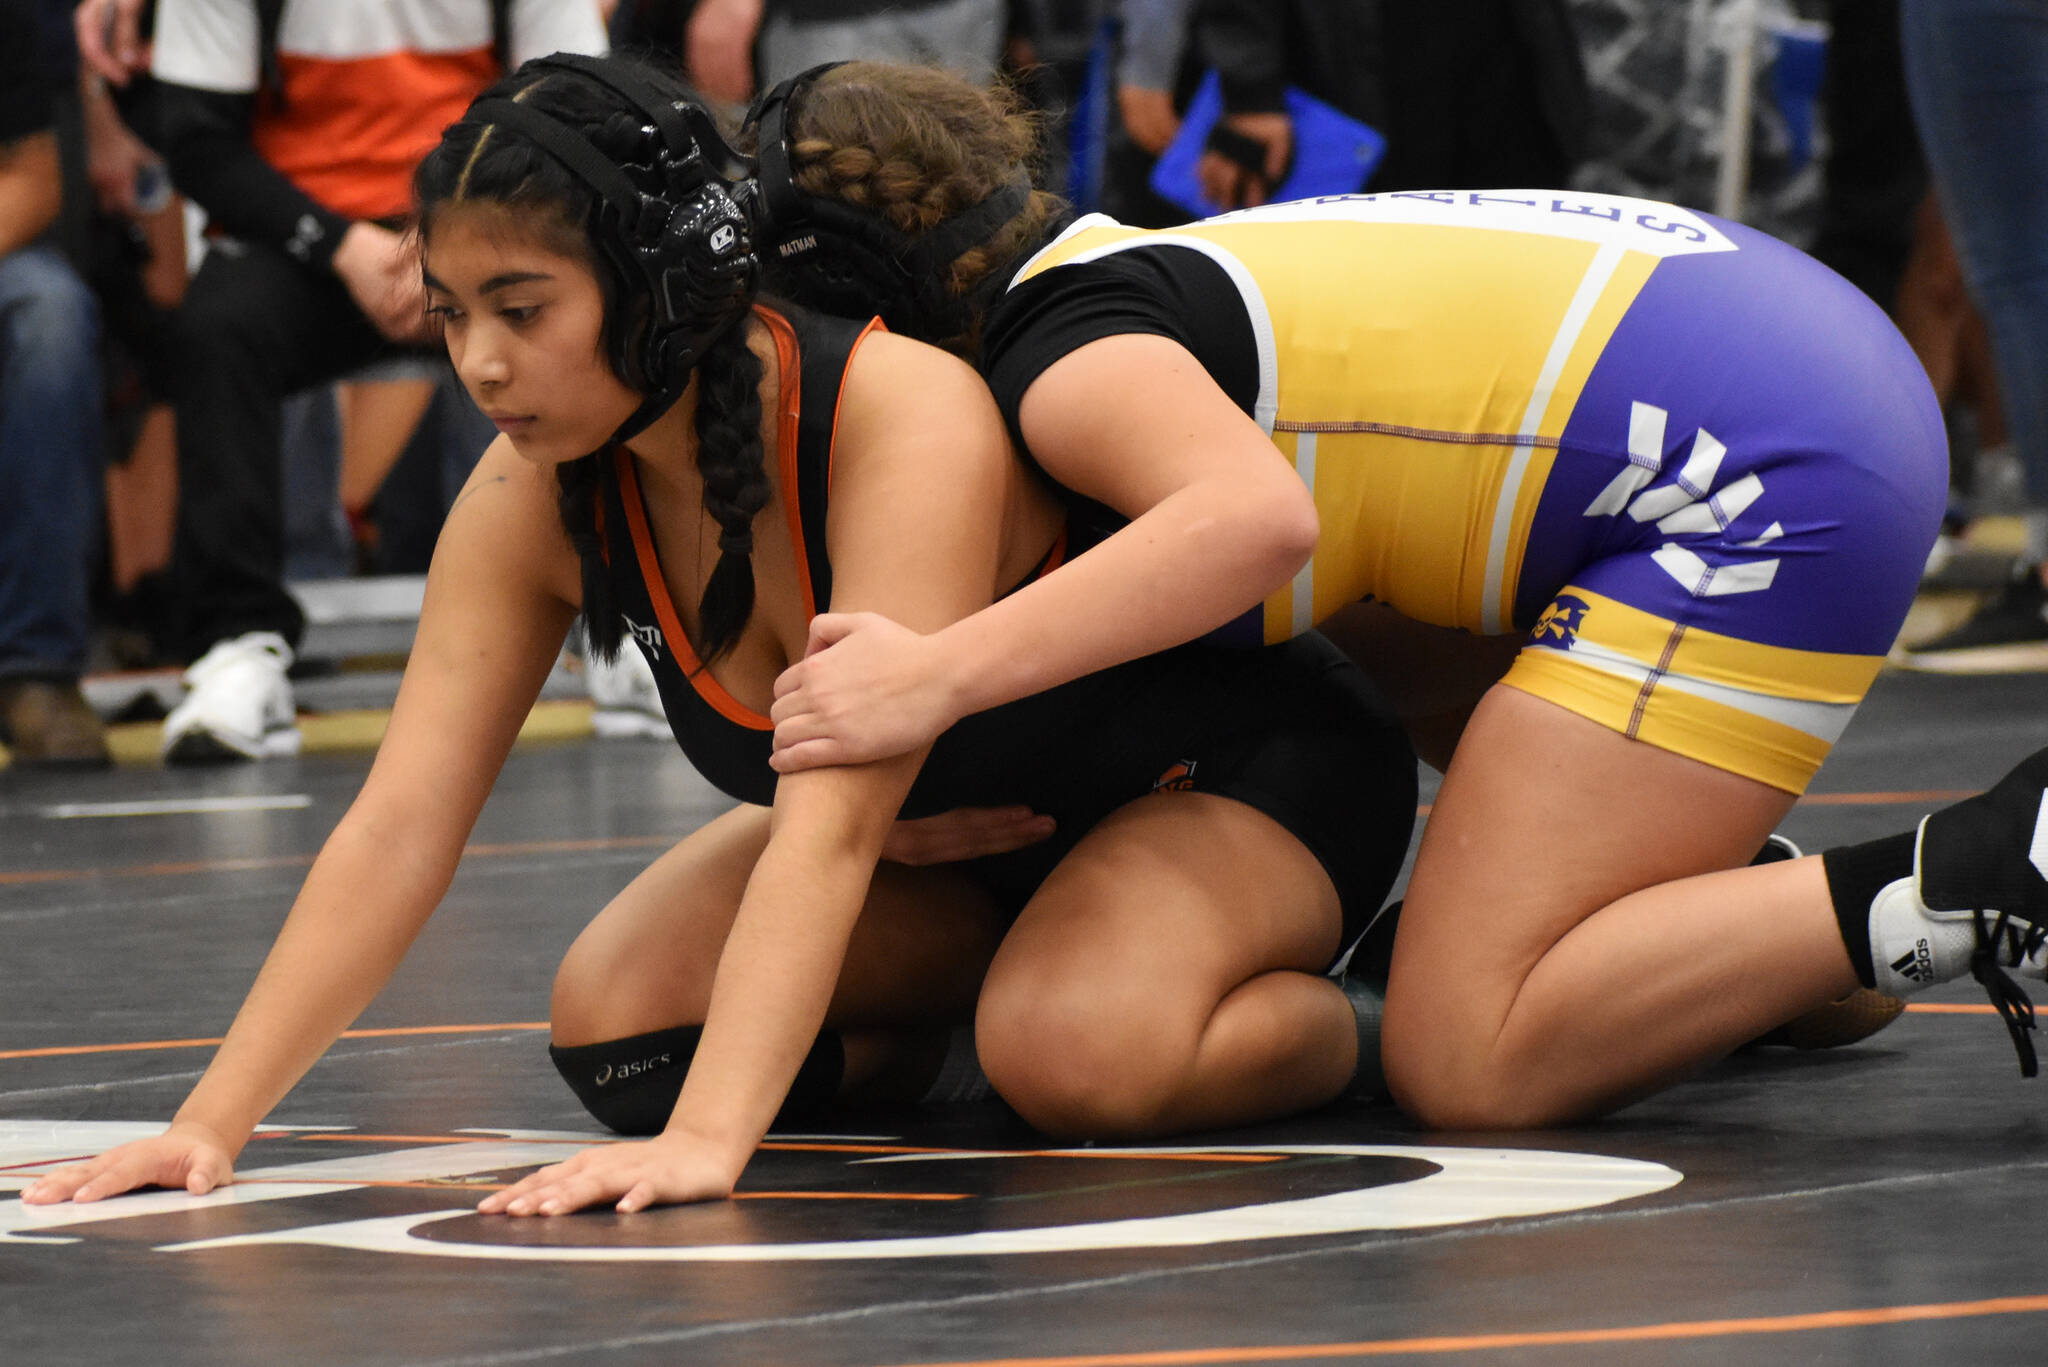 Central Kitsap had the deepest team in the tournament, earning seven total medals out of nine wrestlers. File Photos